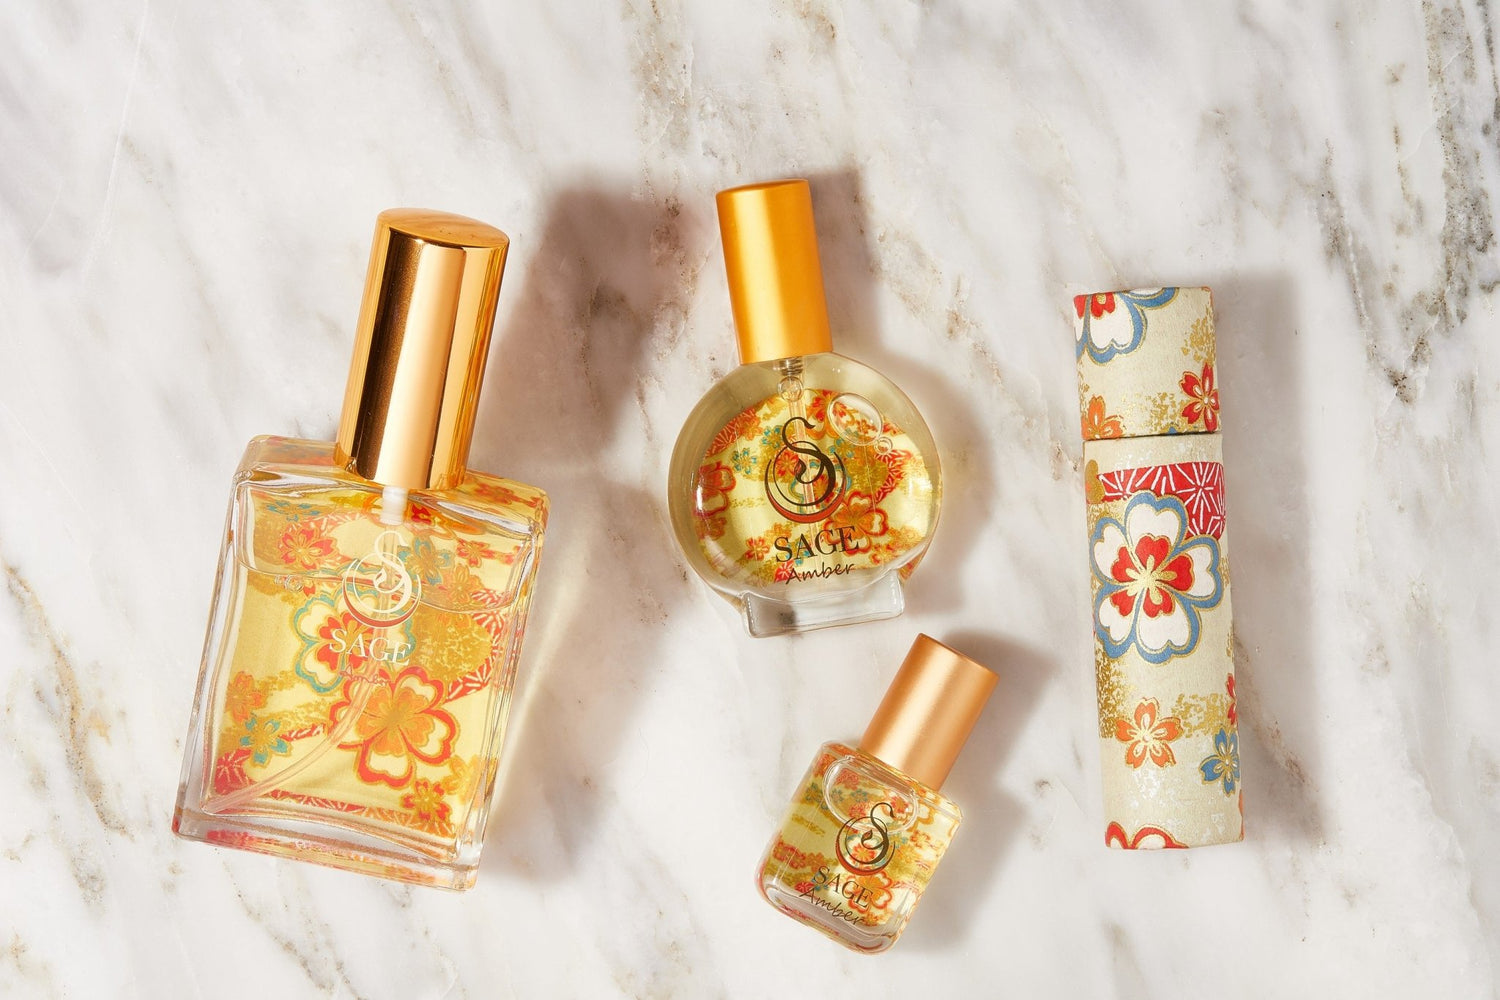 Amber Gemstone Perfume Collection by Sage - The Sage Lifestyle